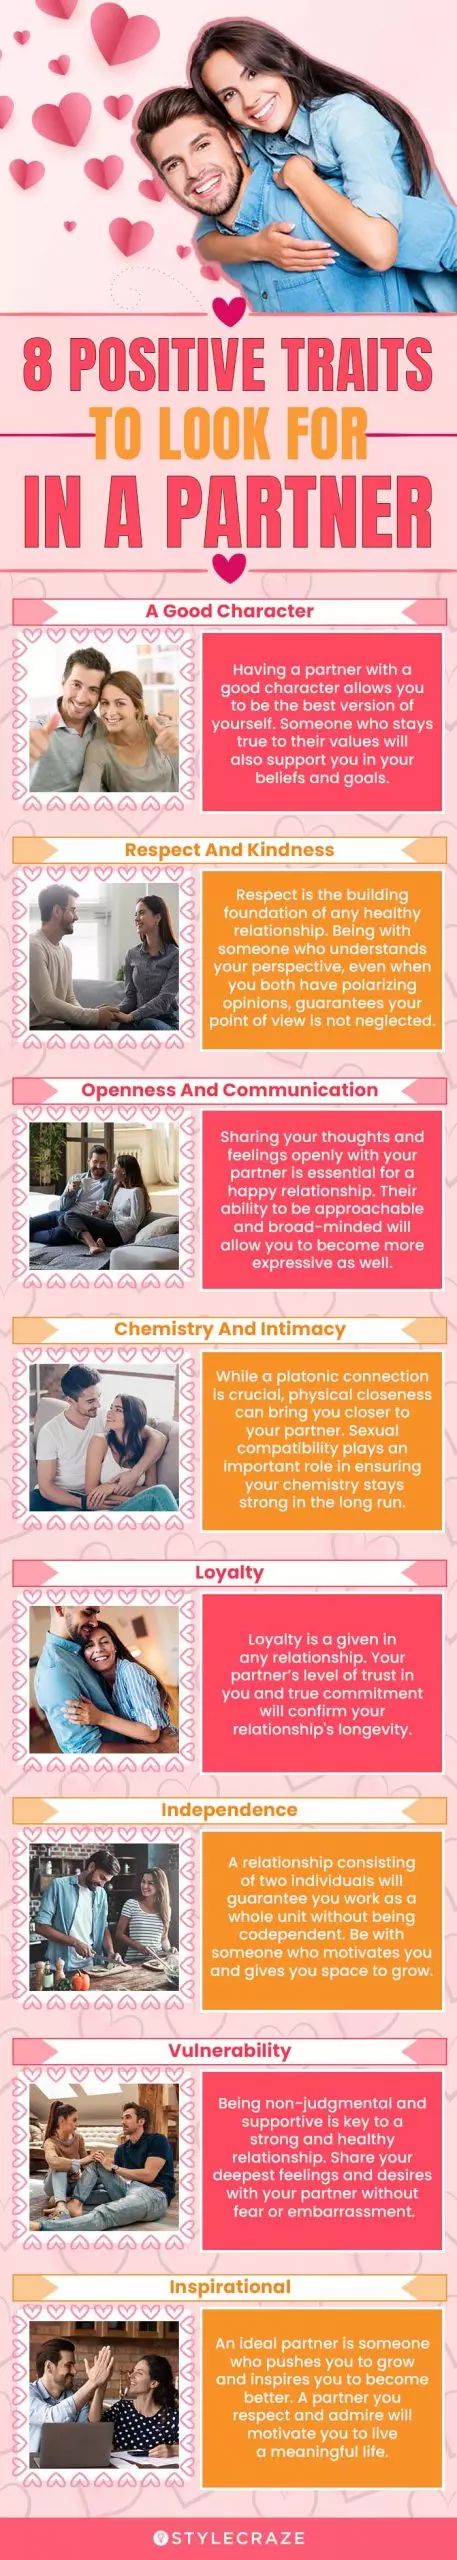 8 positive traits to look for in a partner (infographic)